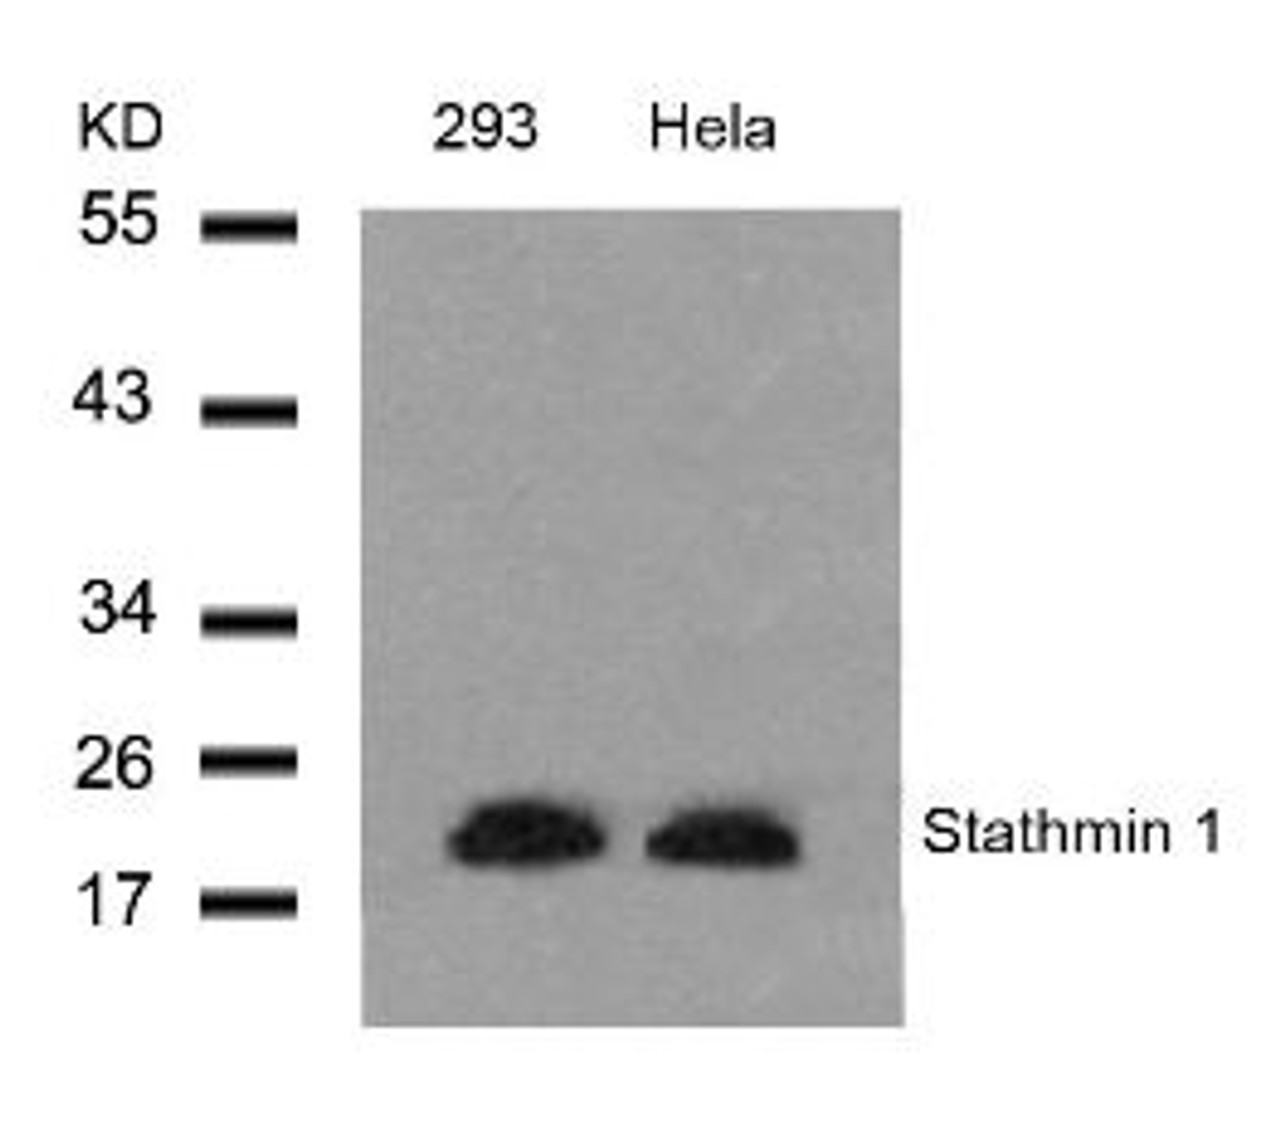 Western blot analysis of lysed extracts from 293 and HeLa cells using Stathmin 1 (Ab-25) .